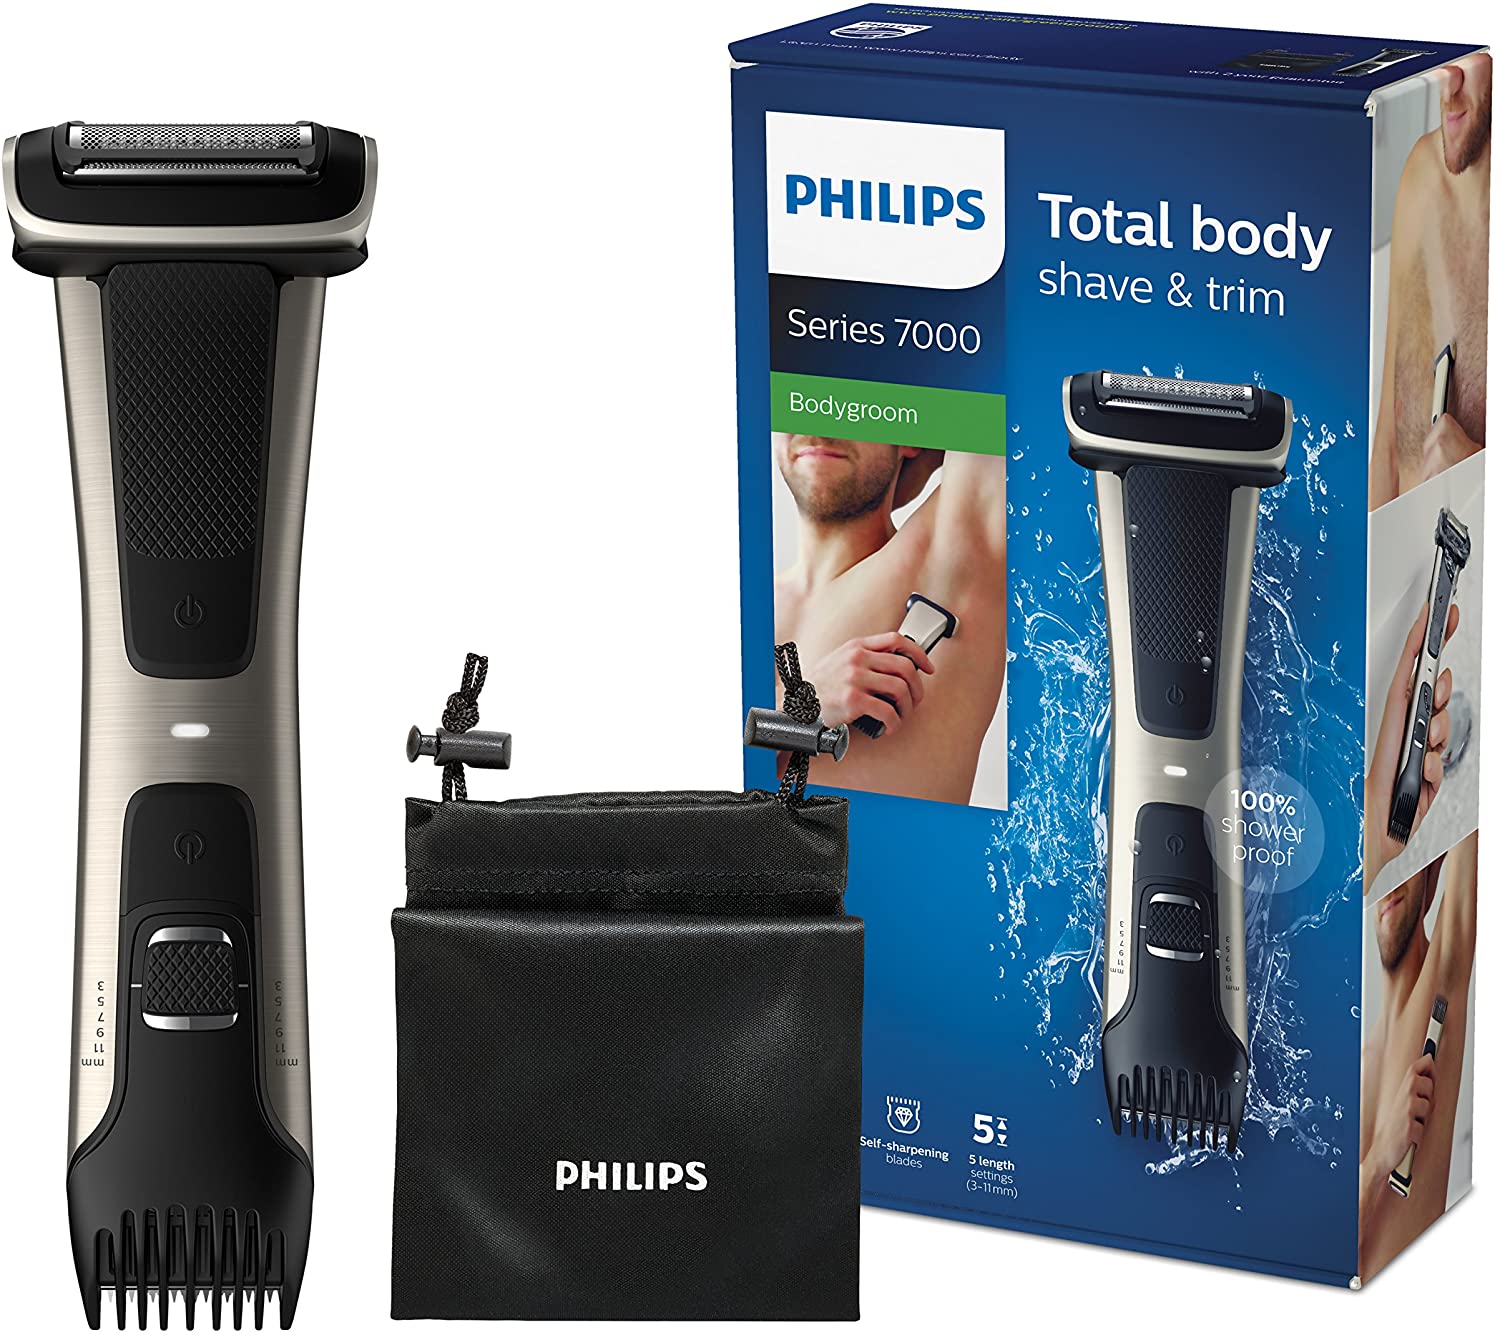 Philips BG7025/15 Bodygroom Series 7000 with Integrated Comb Attachment